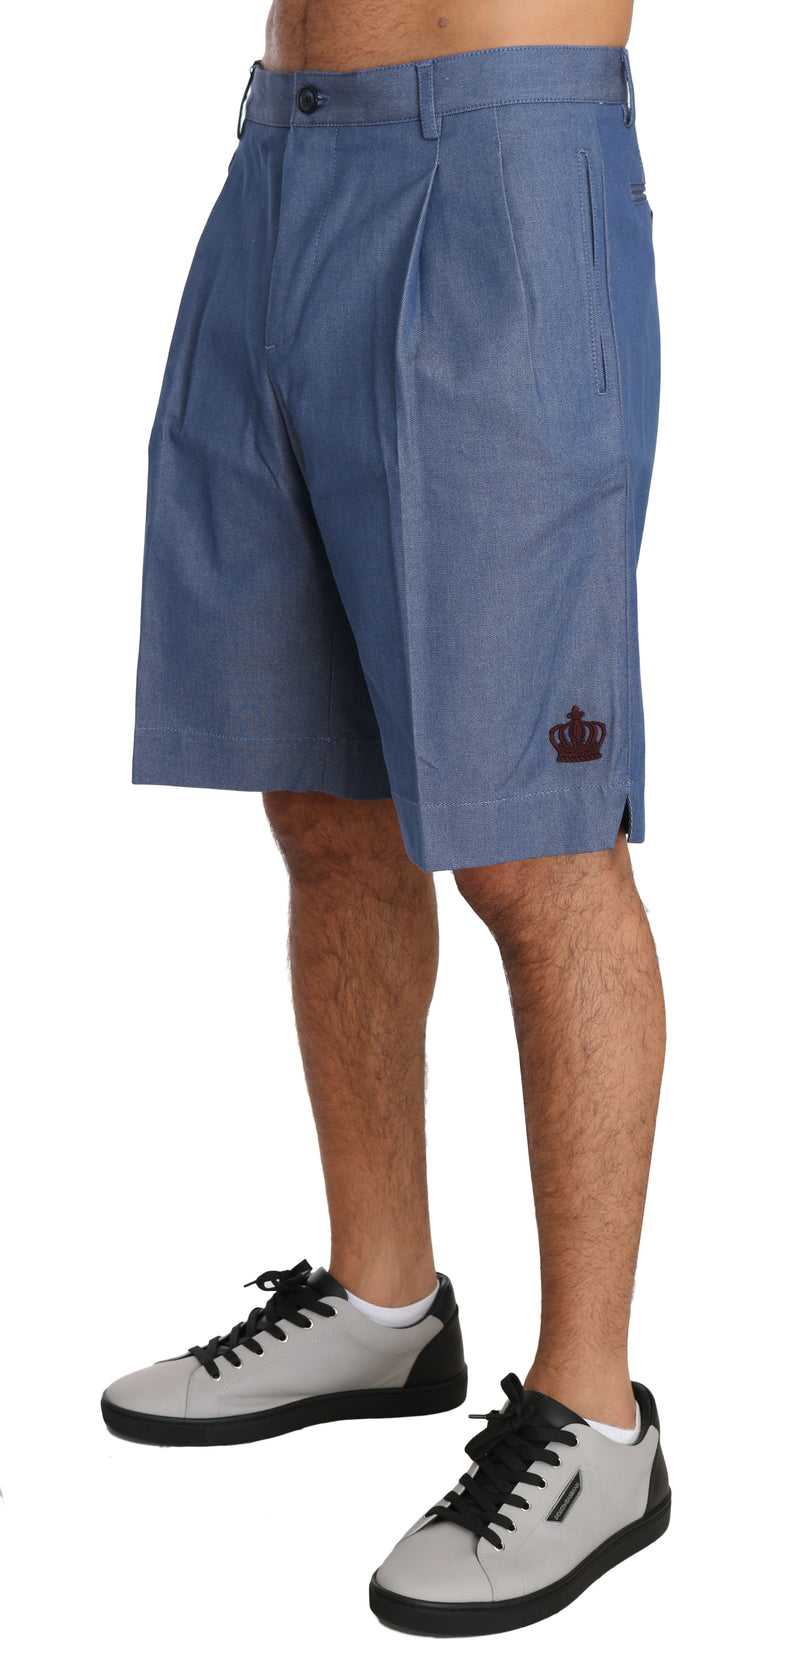 BYX1306Blue Cotton Crown Chinos Knees High Shorts